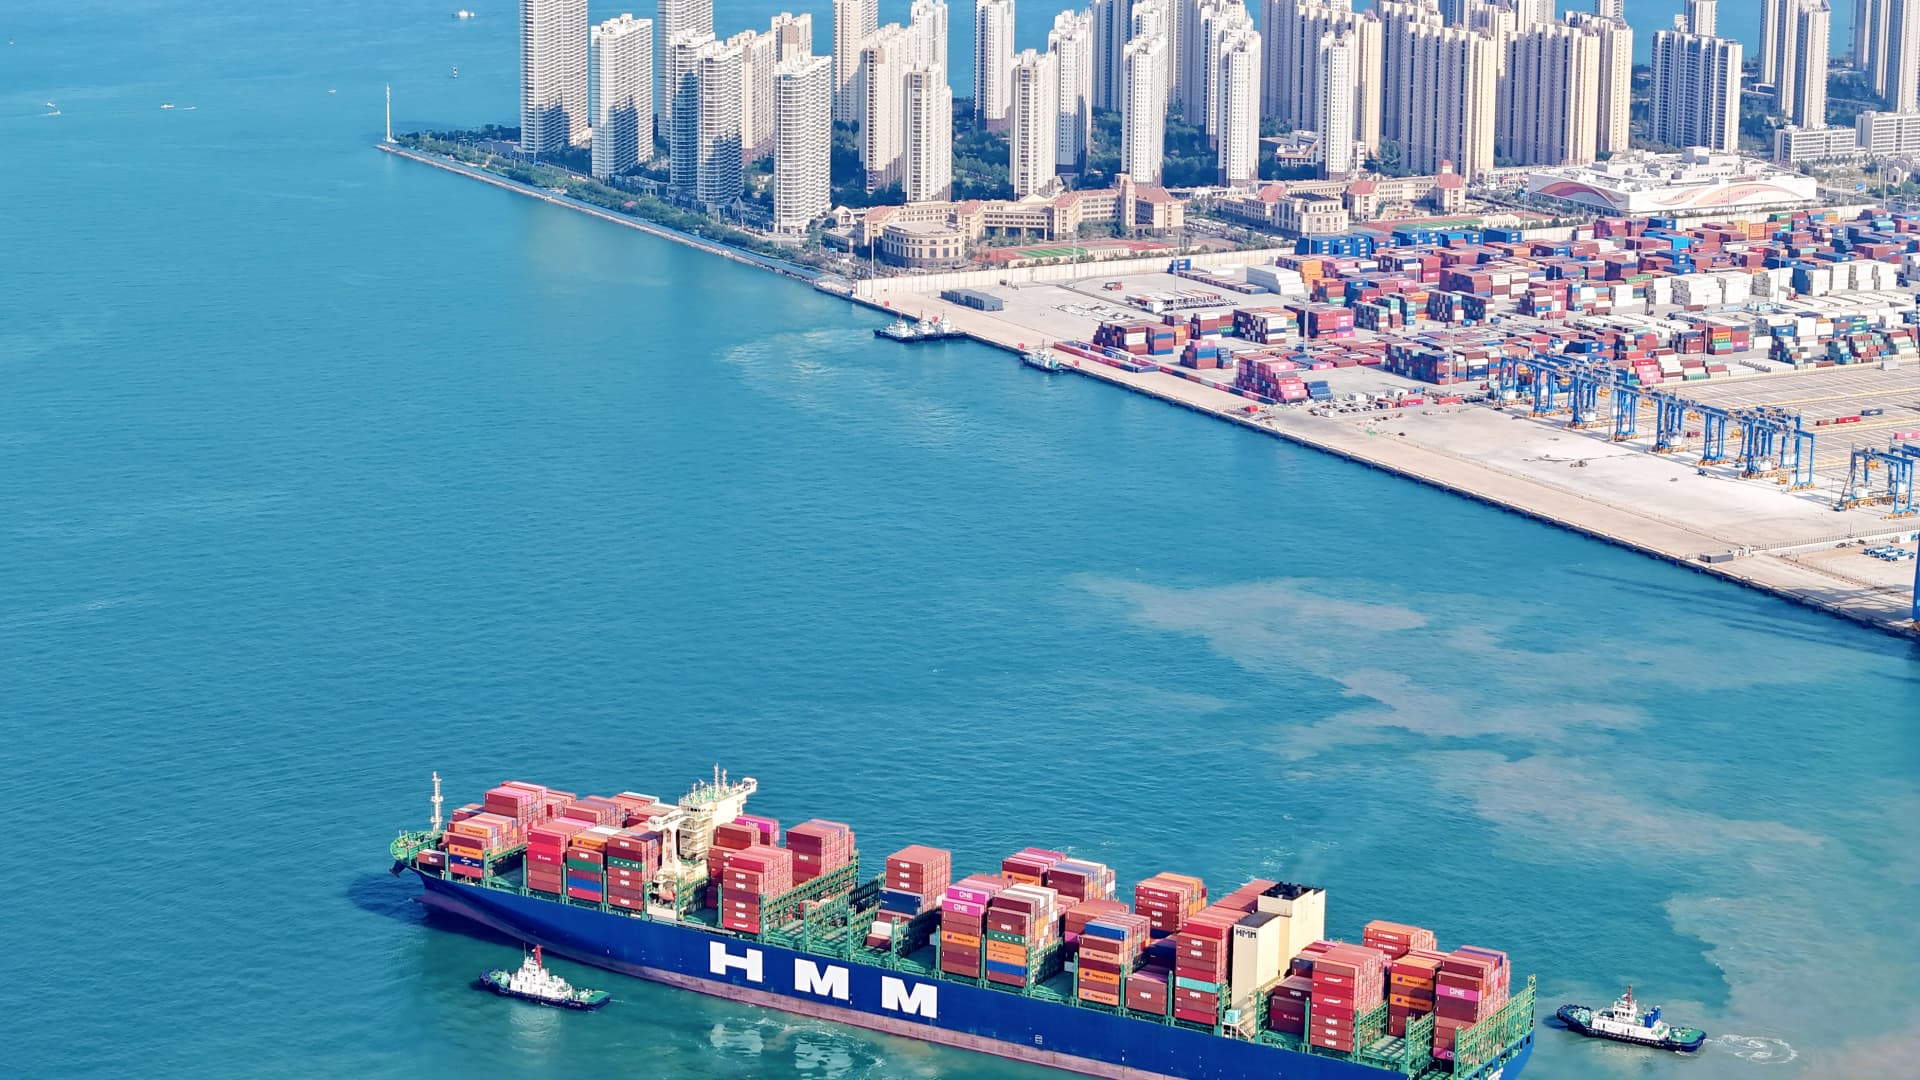 Key Trade Routes Experience Alleviation in Ocean Freight Inflation Post Red Sea Attack